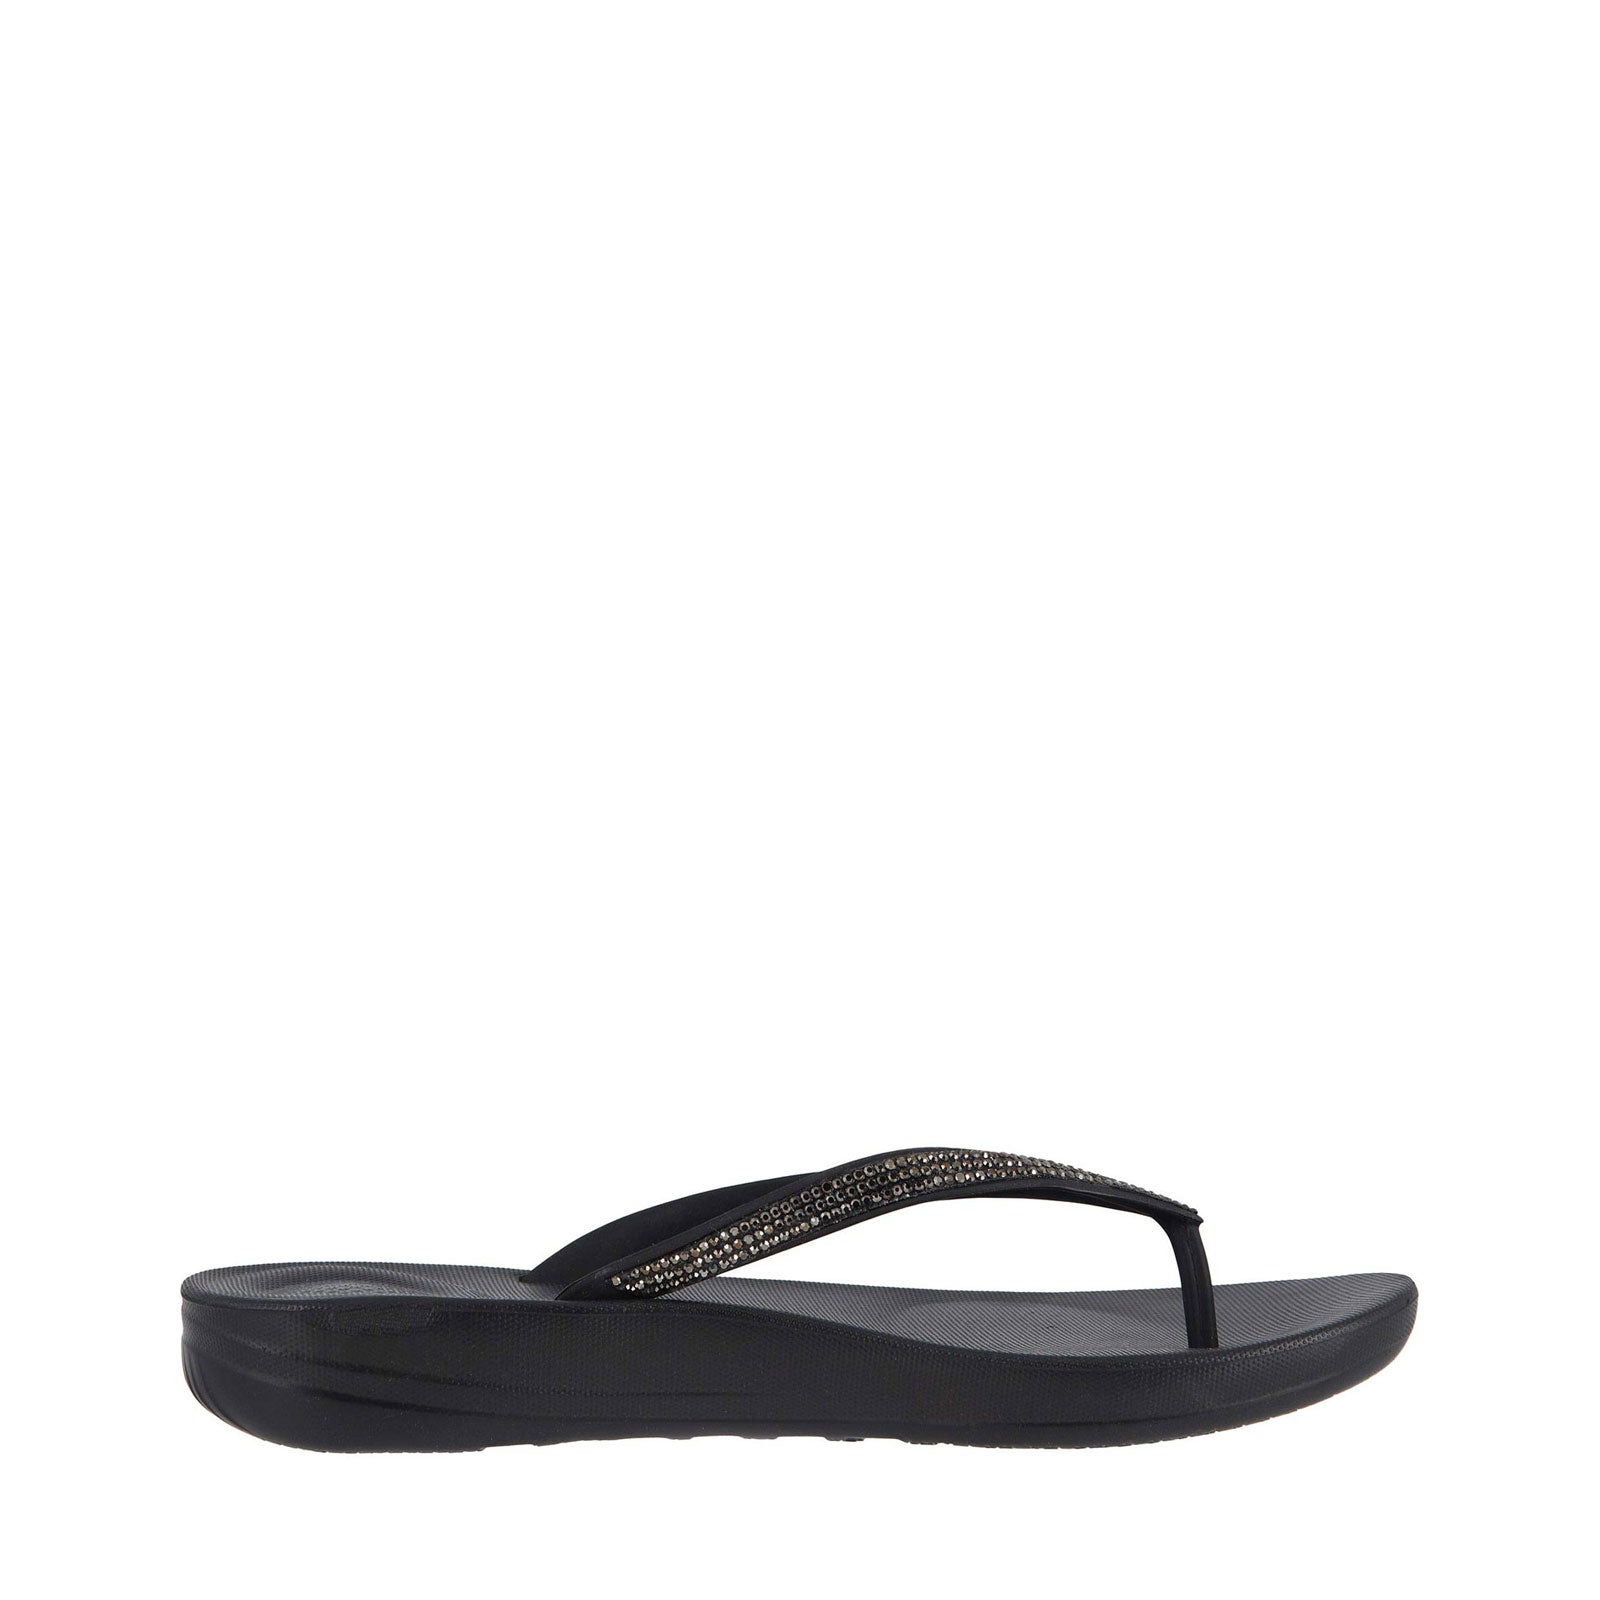 Fitflop - Brand